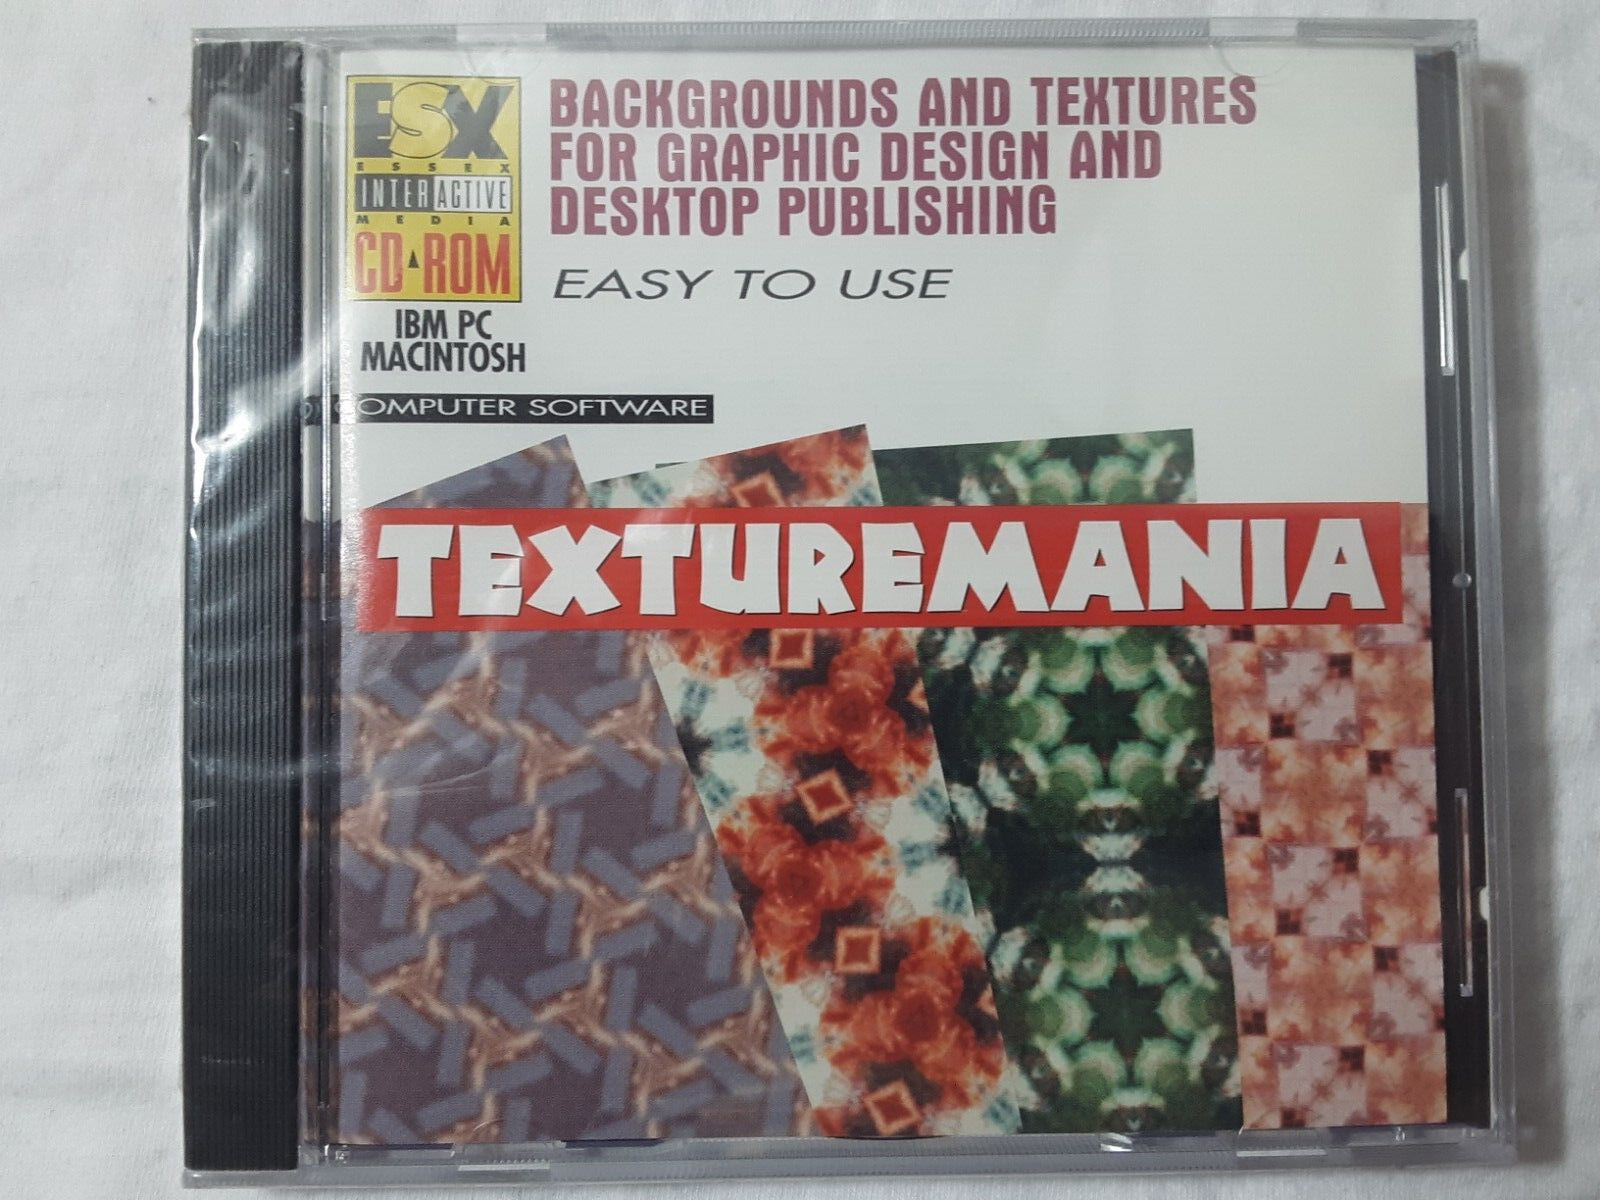 retro 1994 CD-Rom - Texturemania graphic design royalty free images backgrounds